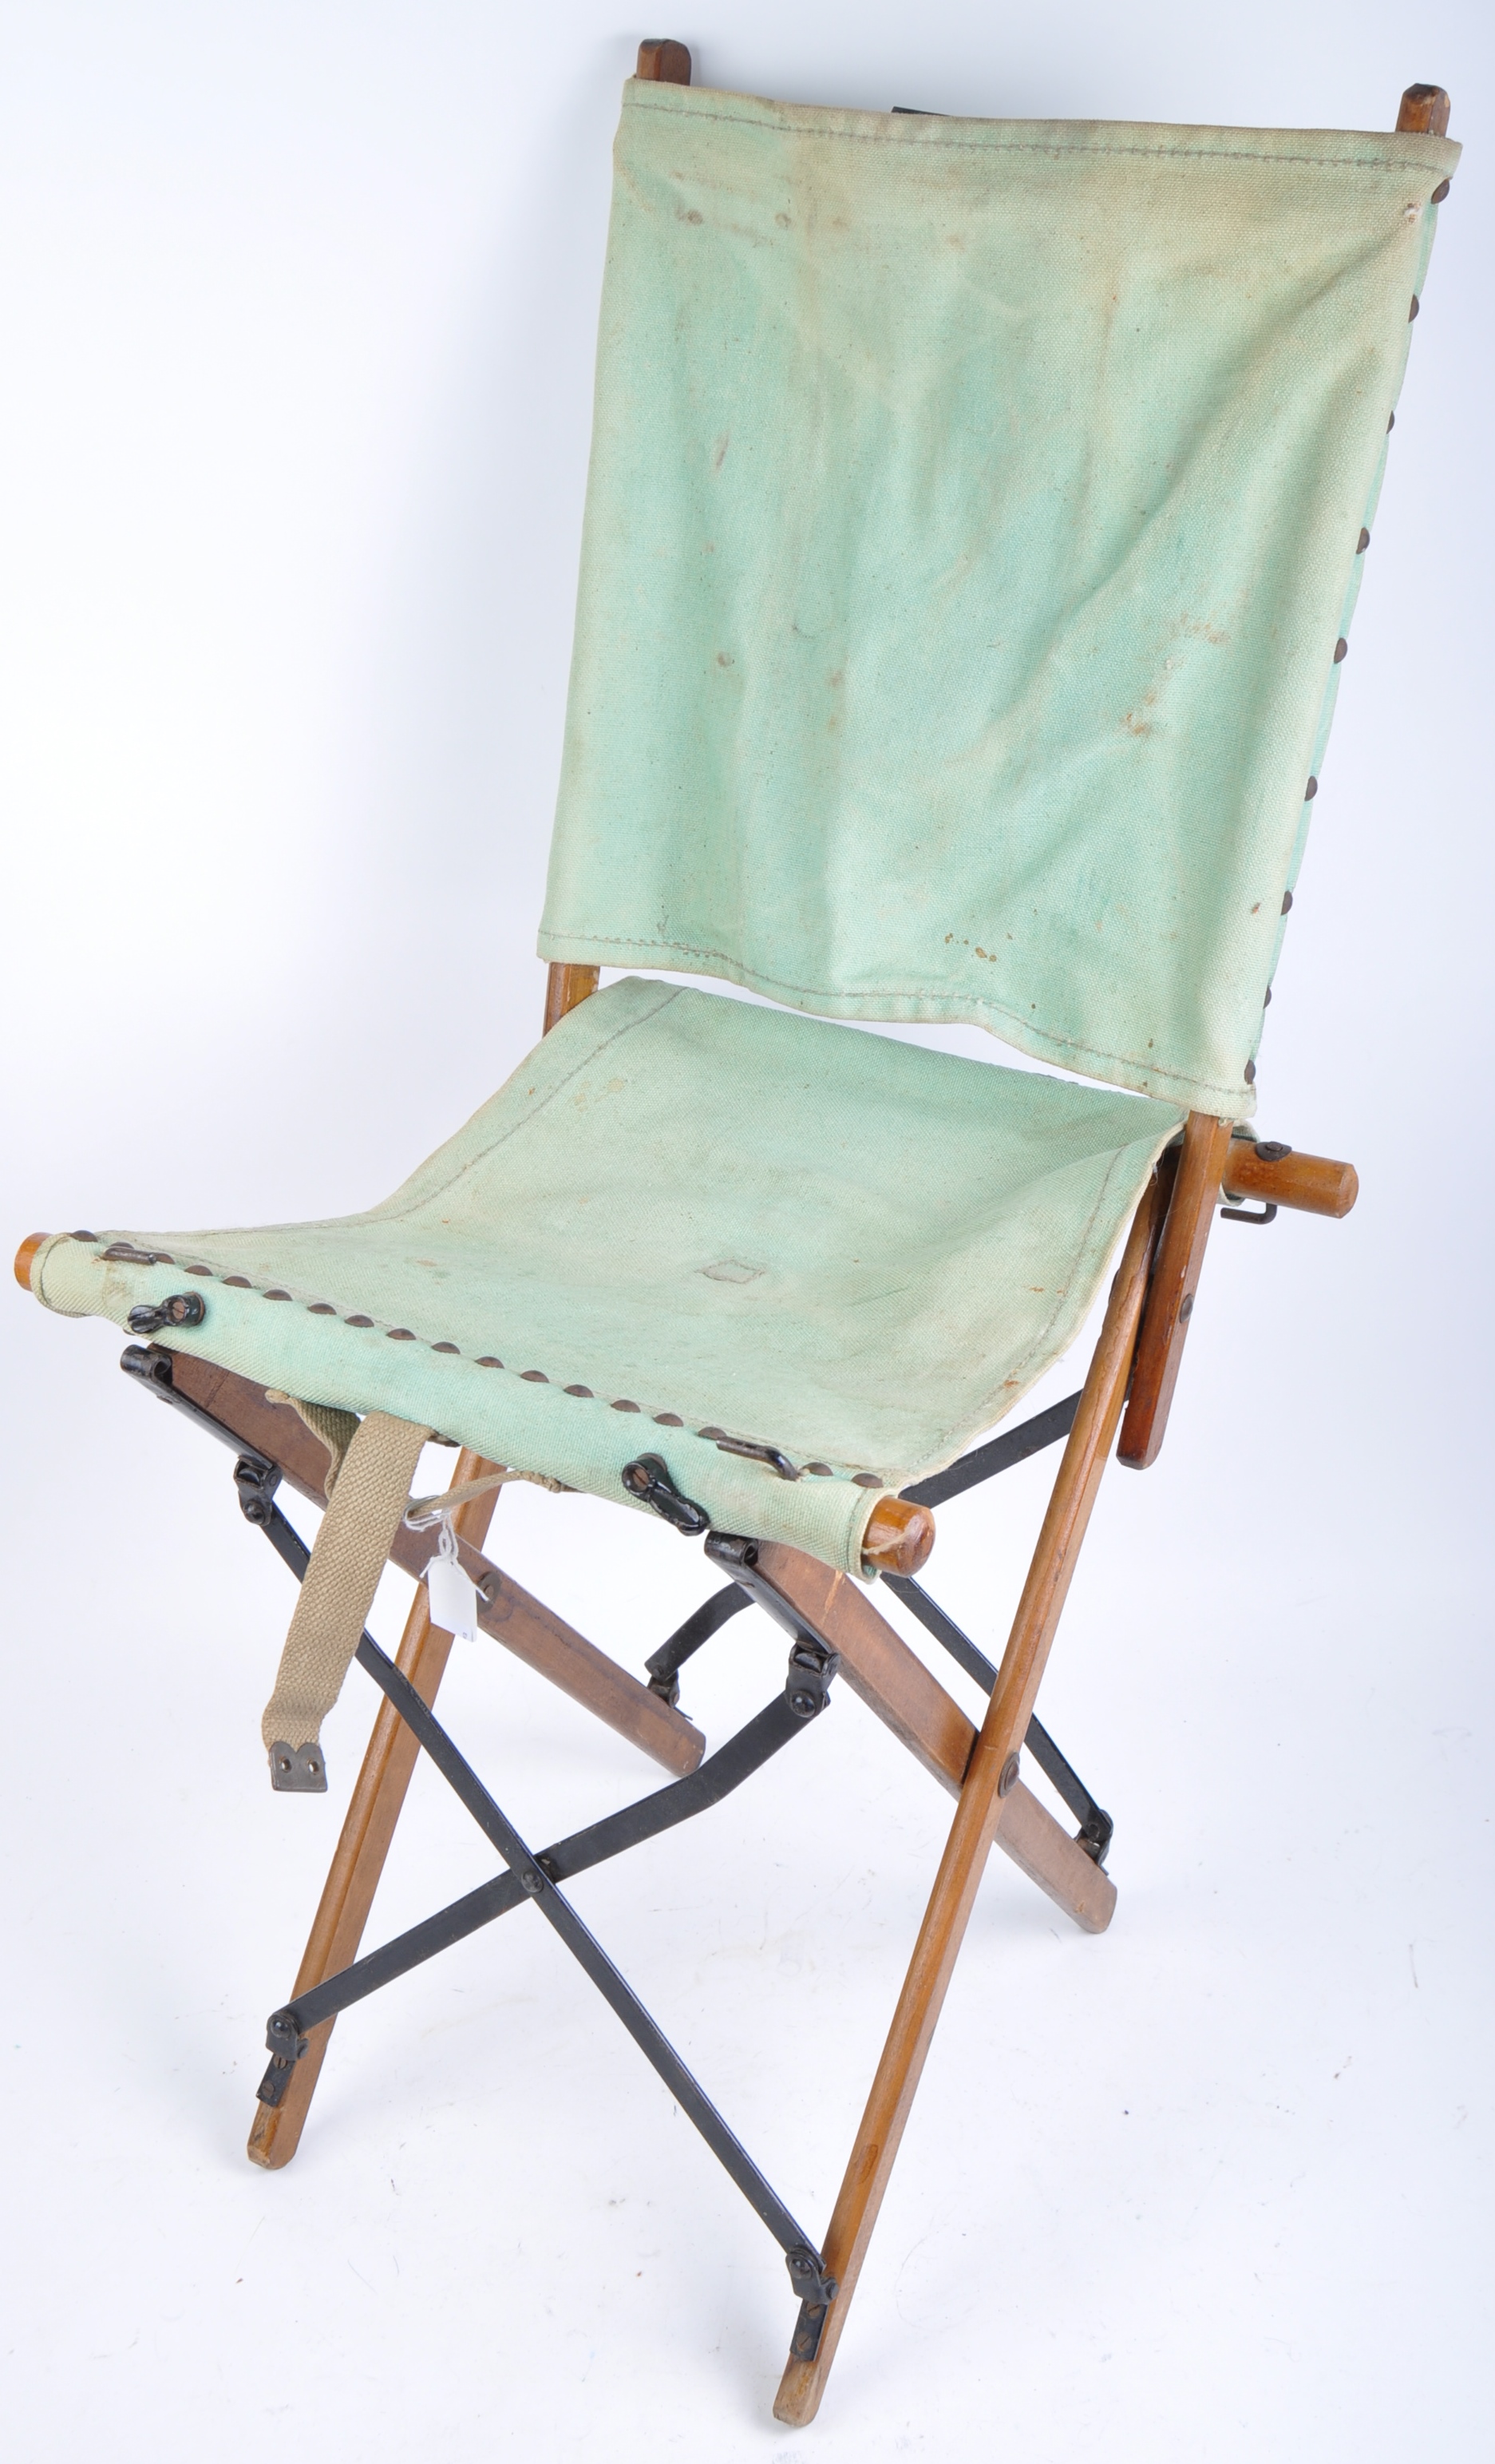 WWII SECOND WORLD WAR BRITISH ARMY FOLDING CAMPAIGN CHAIR - Image 2 of 7